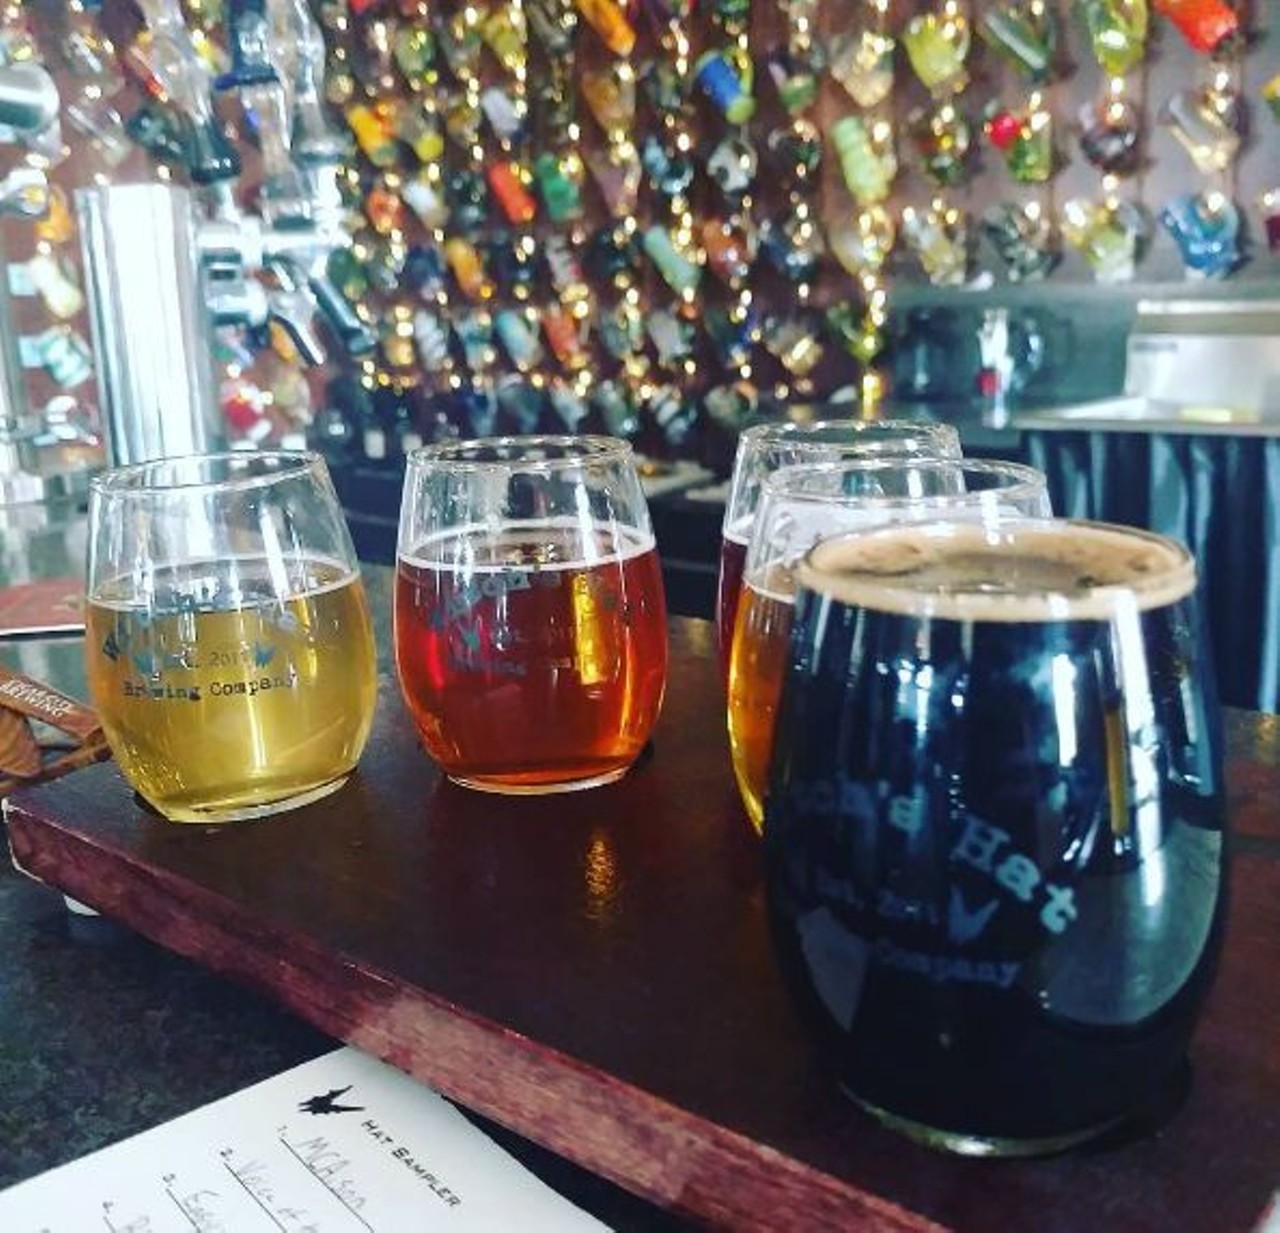 Witch&#146;s Hat Brewing Co.
No green beer here, but the brewery is selling bottles to benefit St. Jude Children&#146;s Research Hospital. 
Starts at noon; 601 S. Lafayette St., South Lyon; 248-486-2595; witchshatbrewing.com. Photo via @beerandkittens